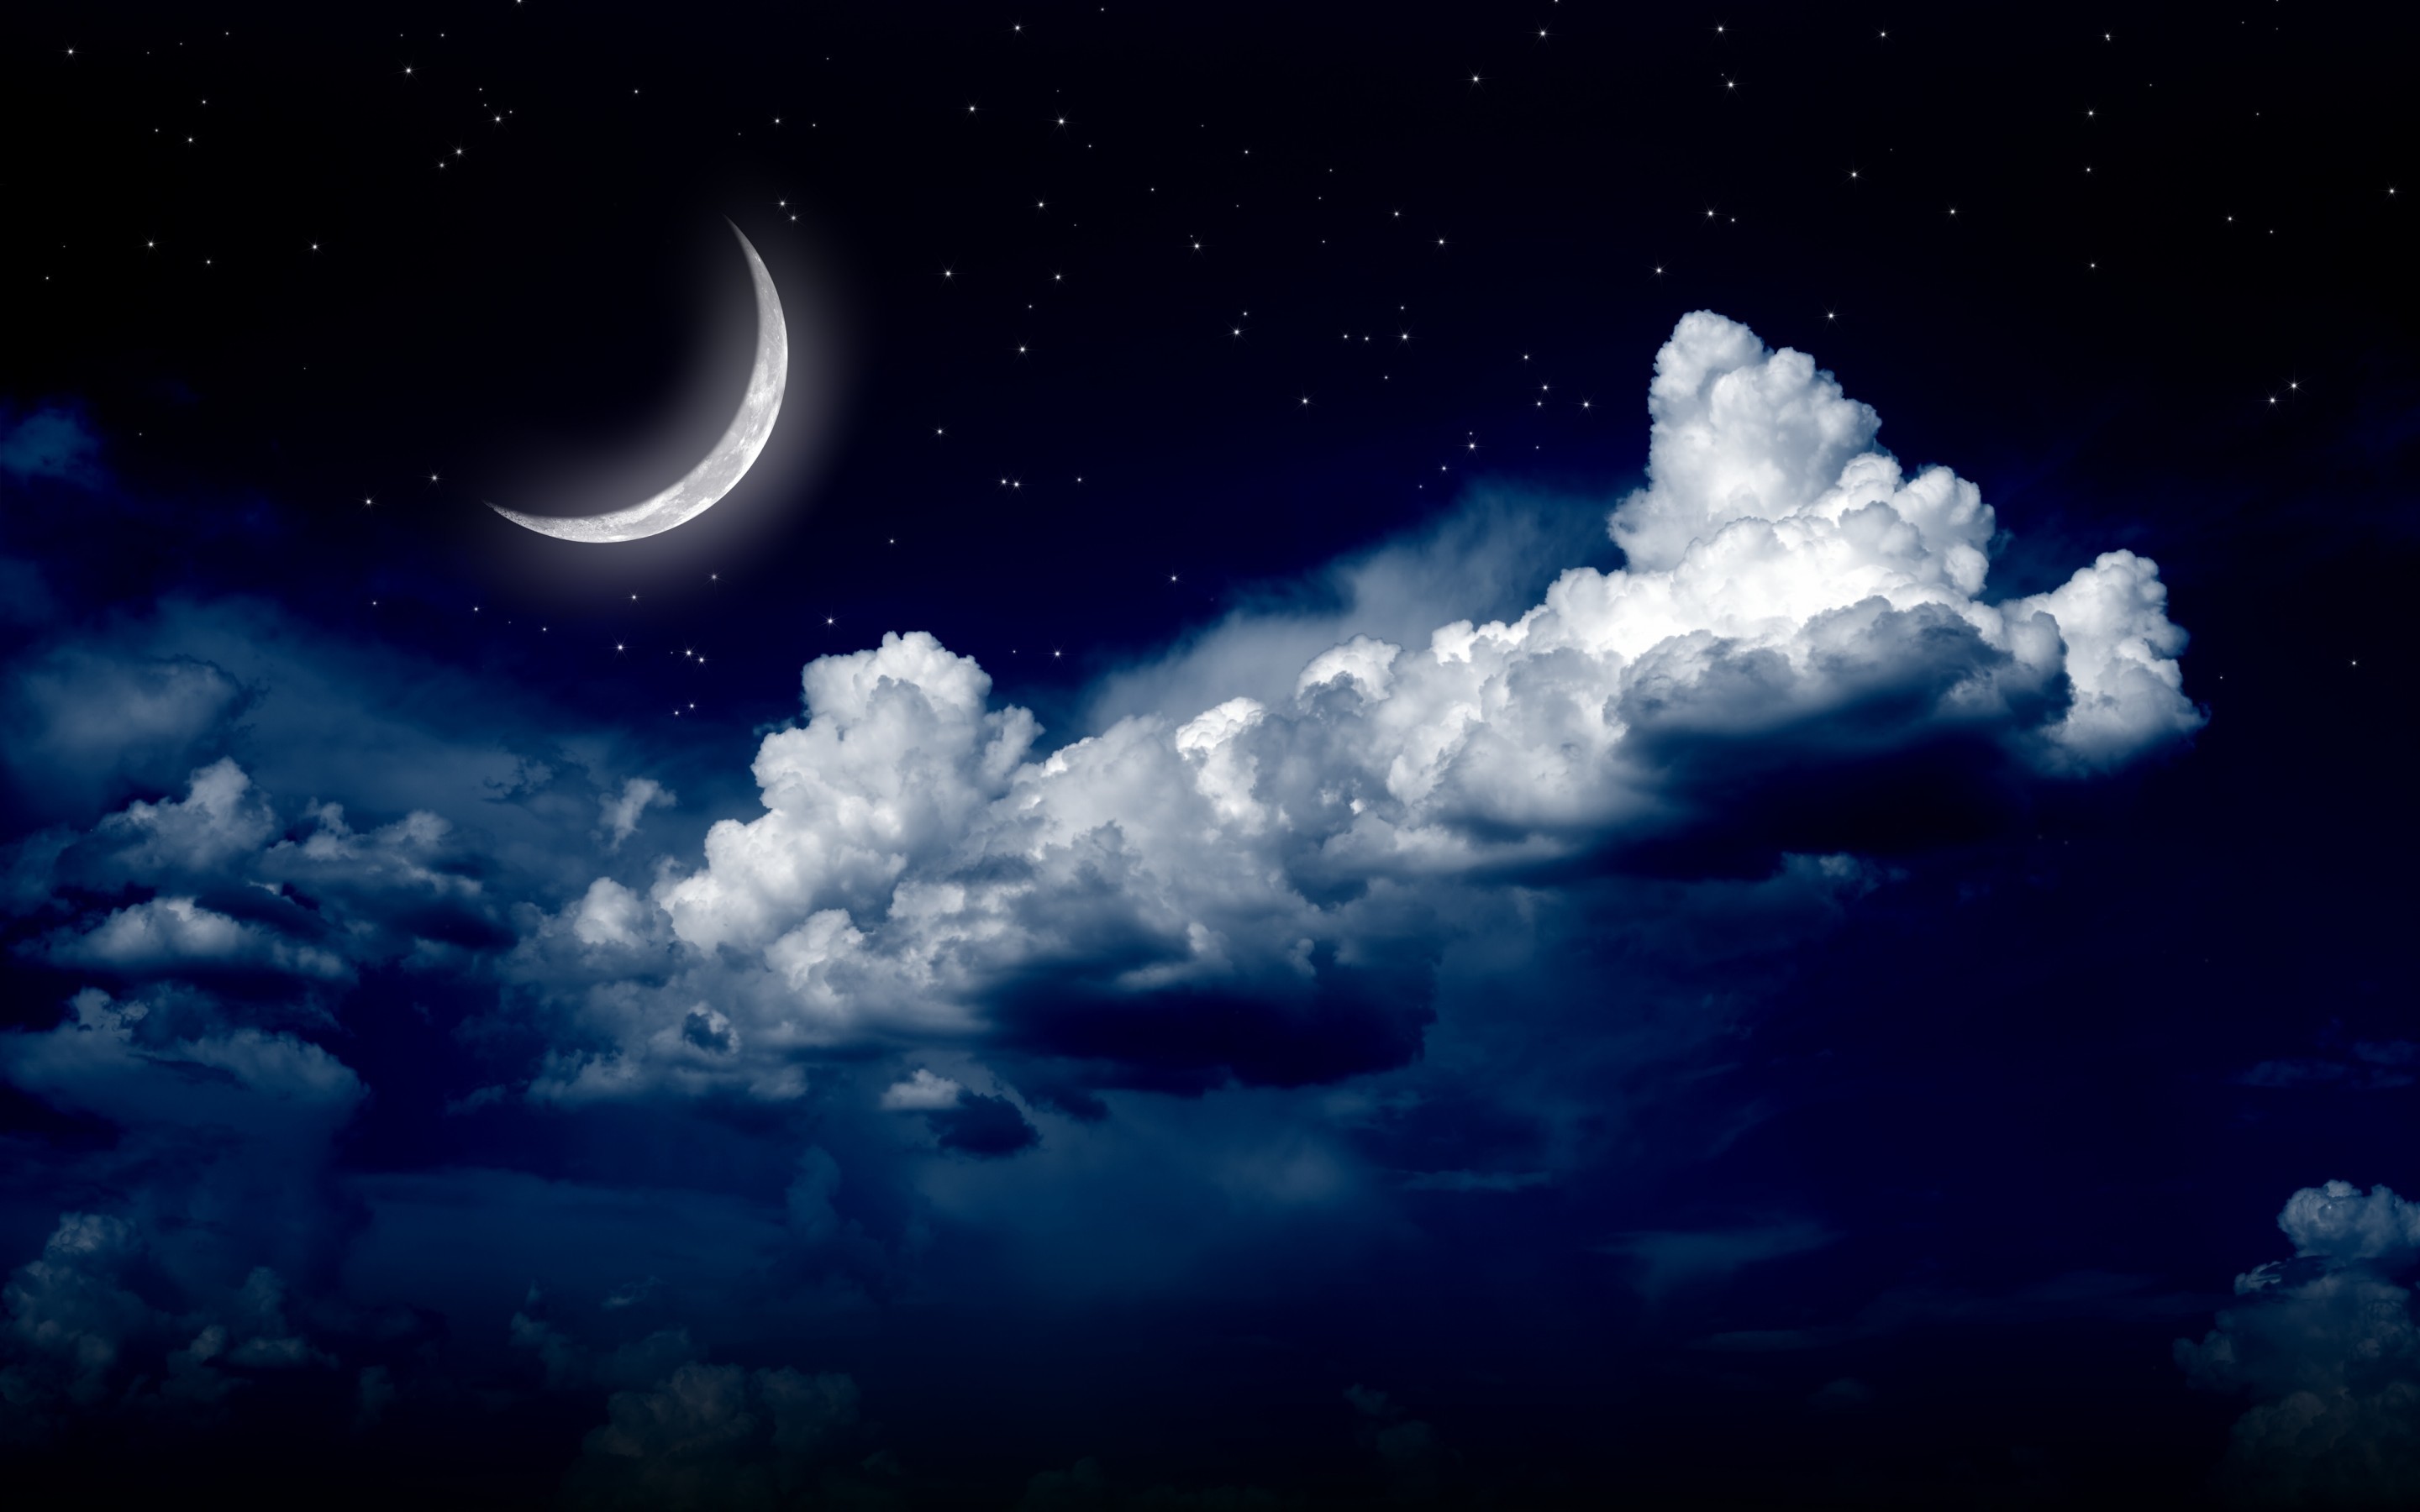 2880x1800 download, view, moon, free background images, stars landscape, clouds, sky, moonlight, river backgrounds, display, nature, night Wallpaper HD